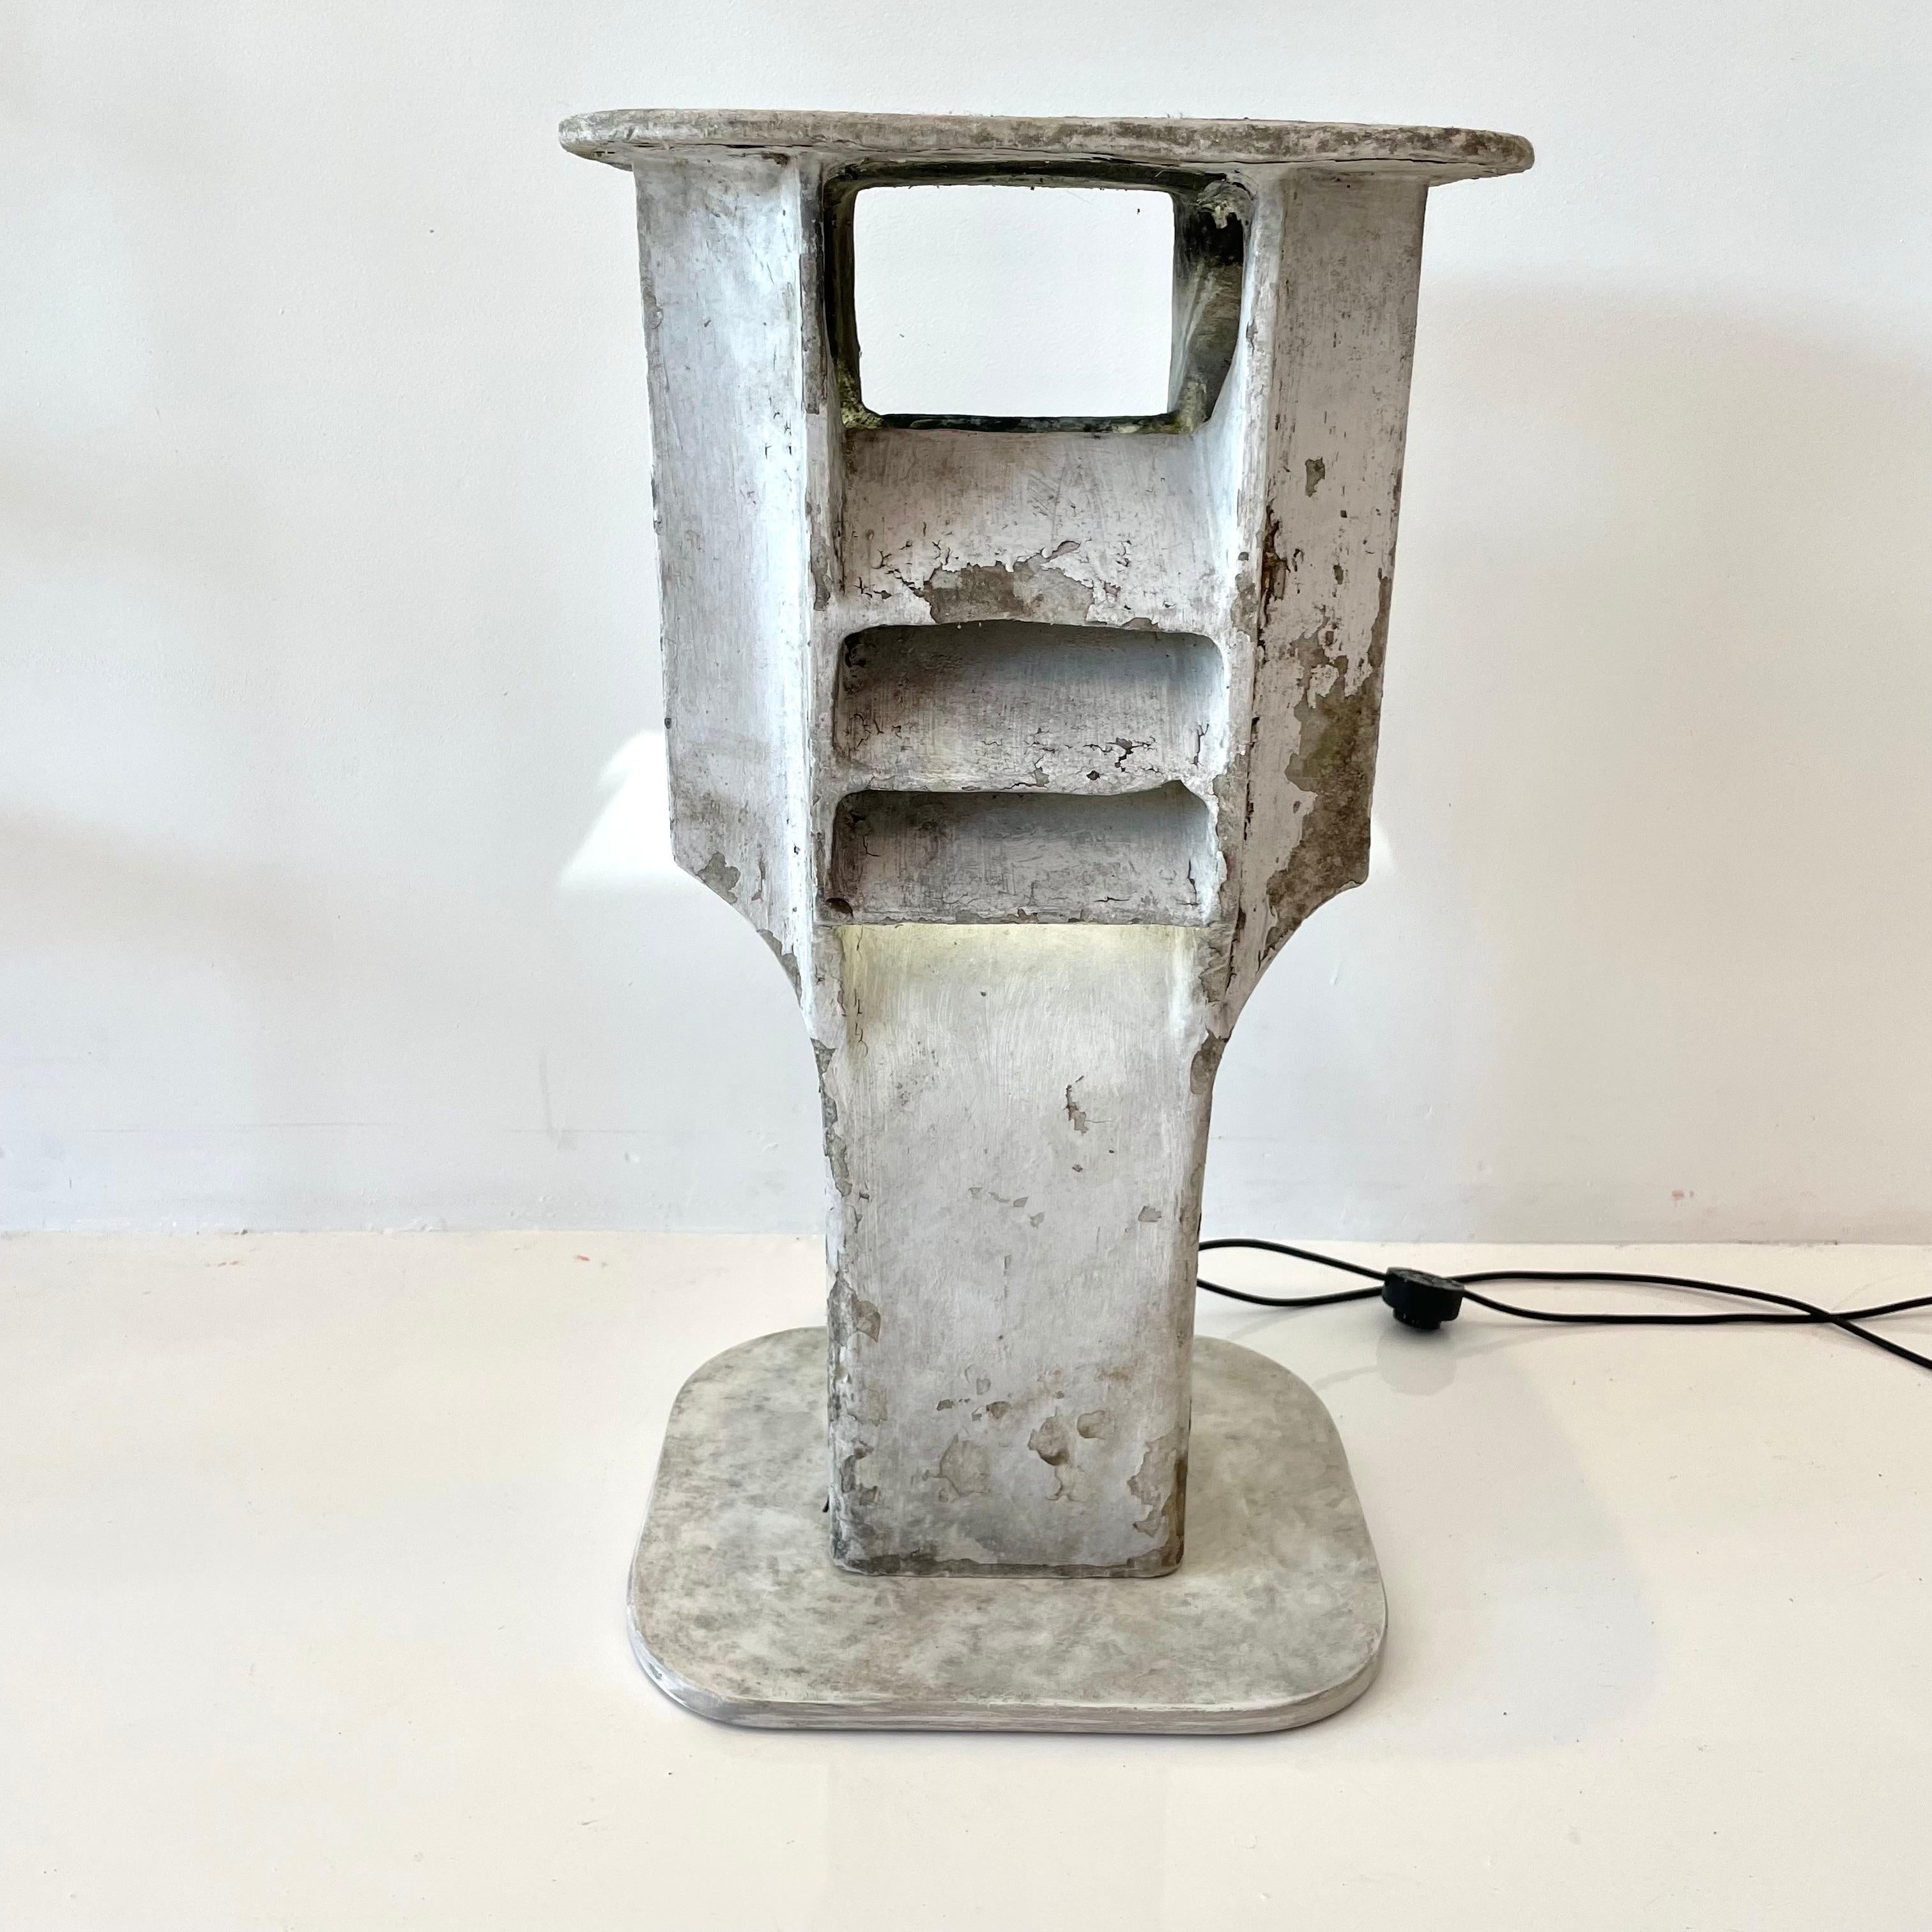 Swiss Willy Guhl Light Up Concrete Side Table, 1960s Switzerland For Sale